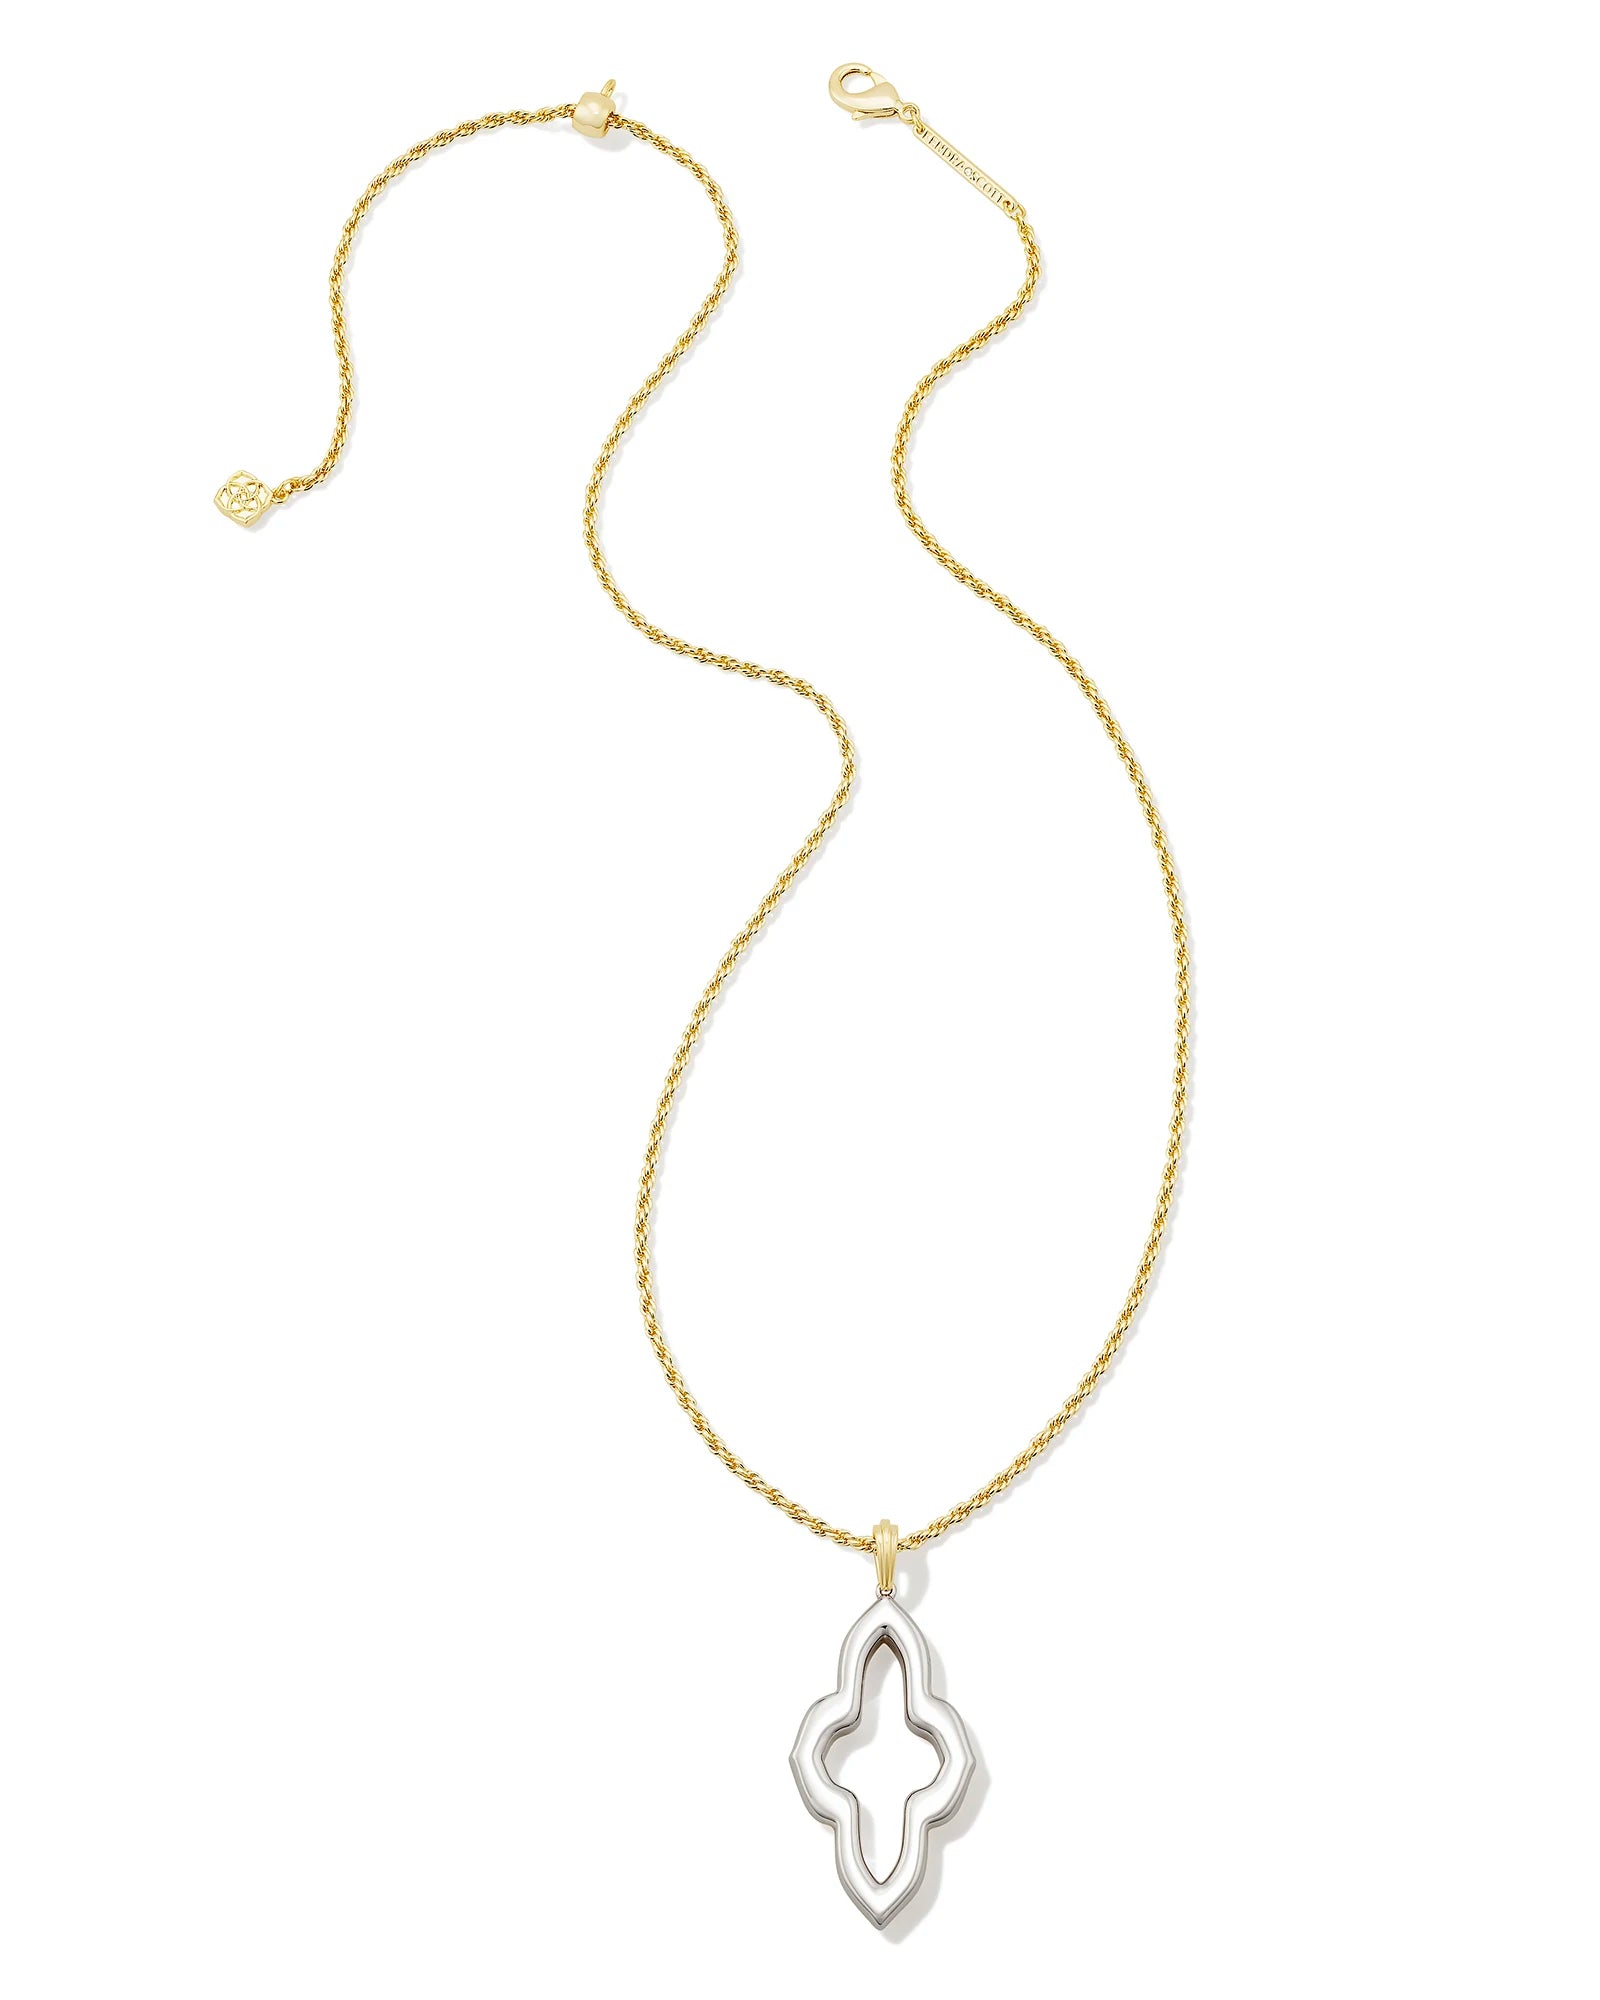 Kendra Scott | Abbie Small Long Pendant Necklace in Mixed Metal - Giddy Up Glamour Boutique